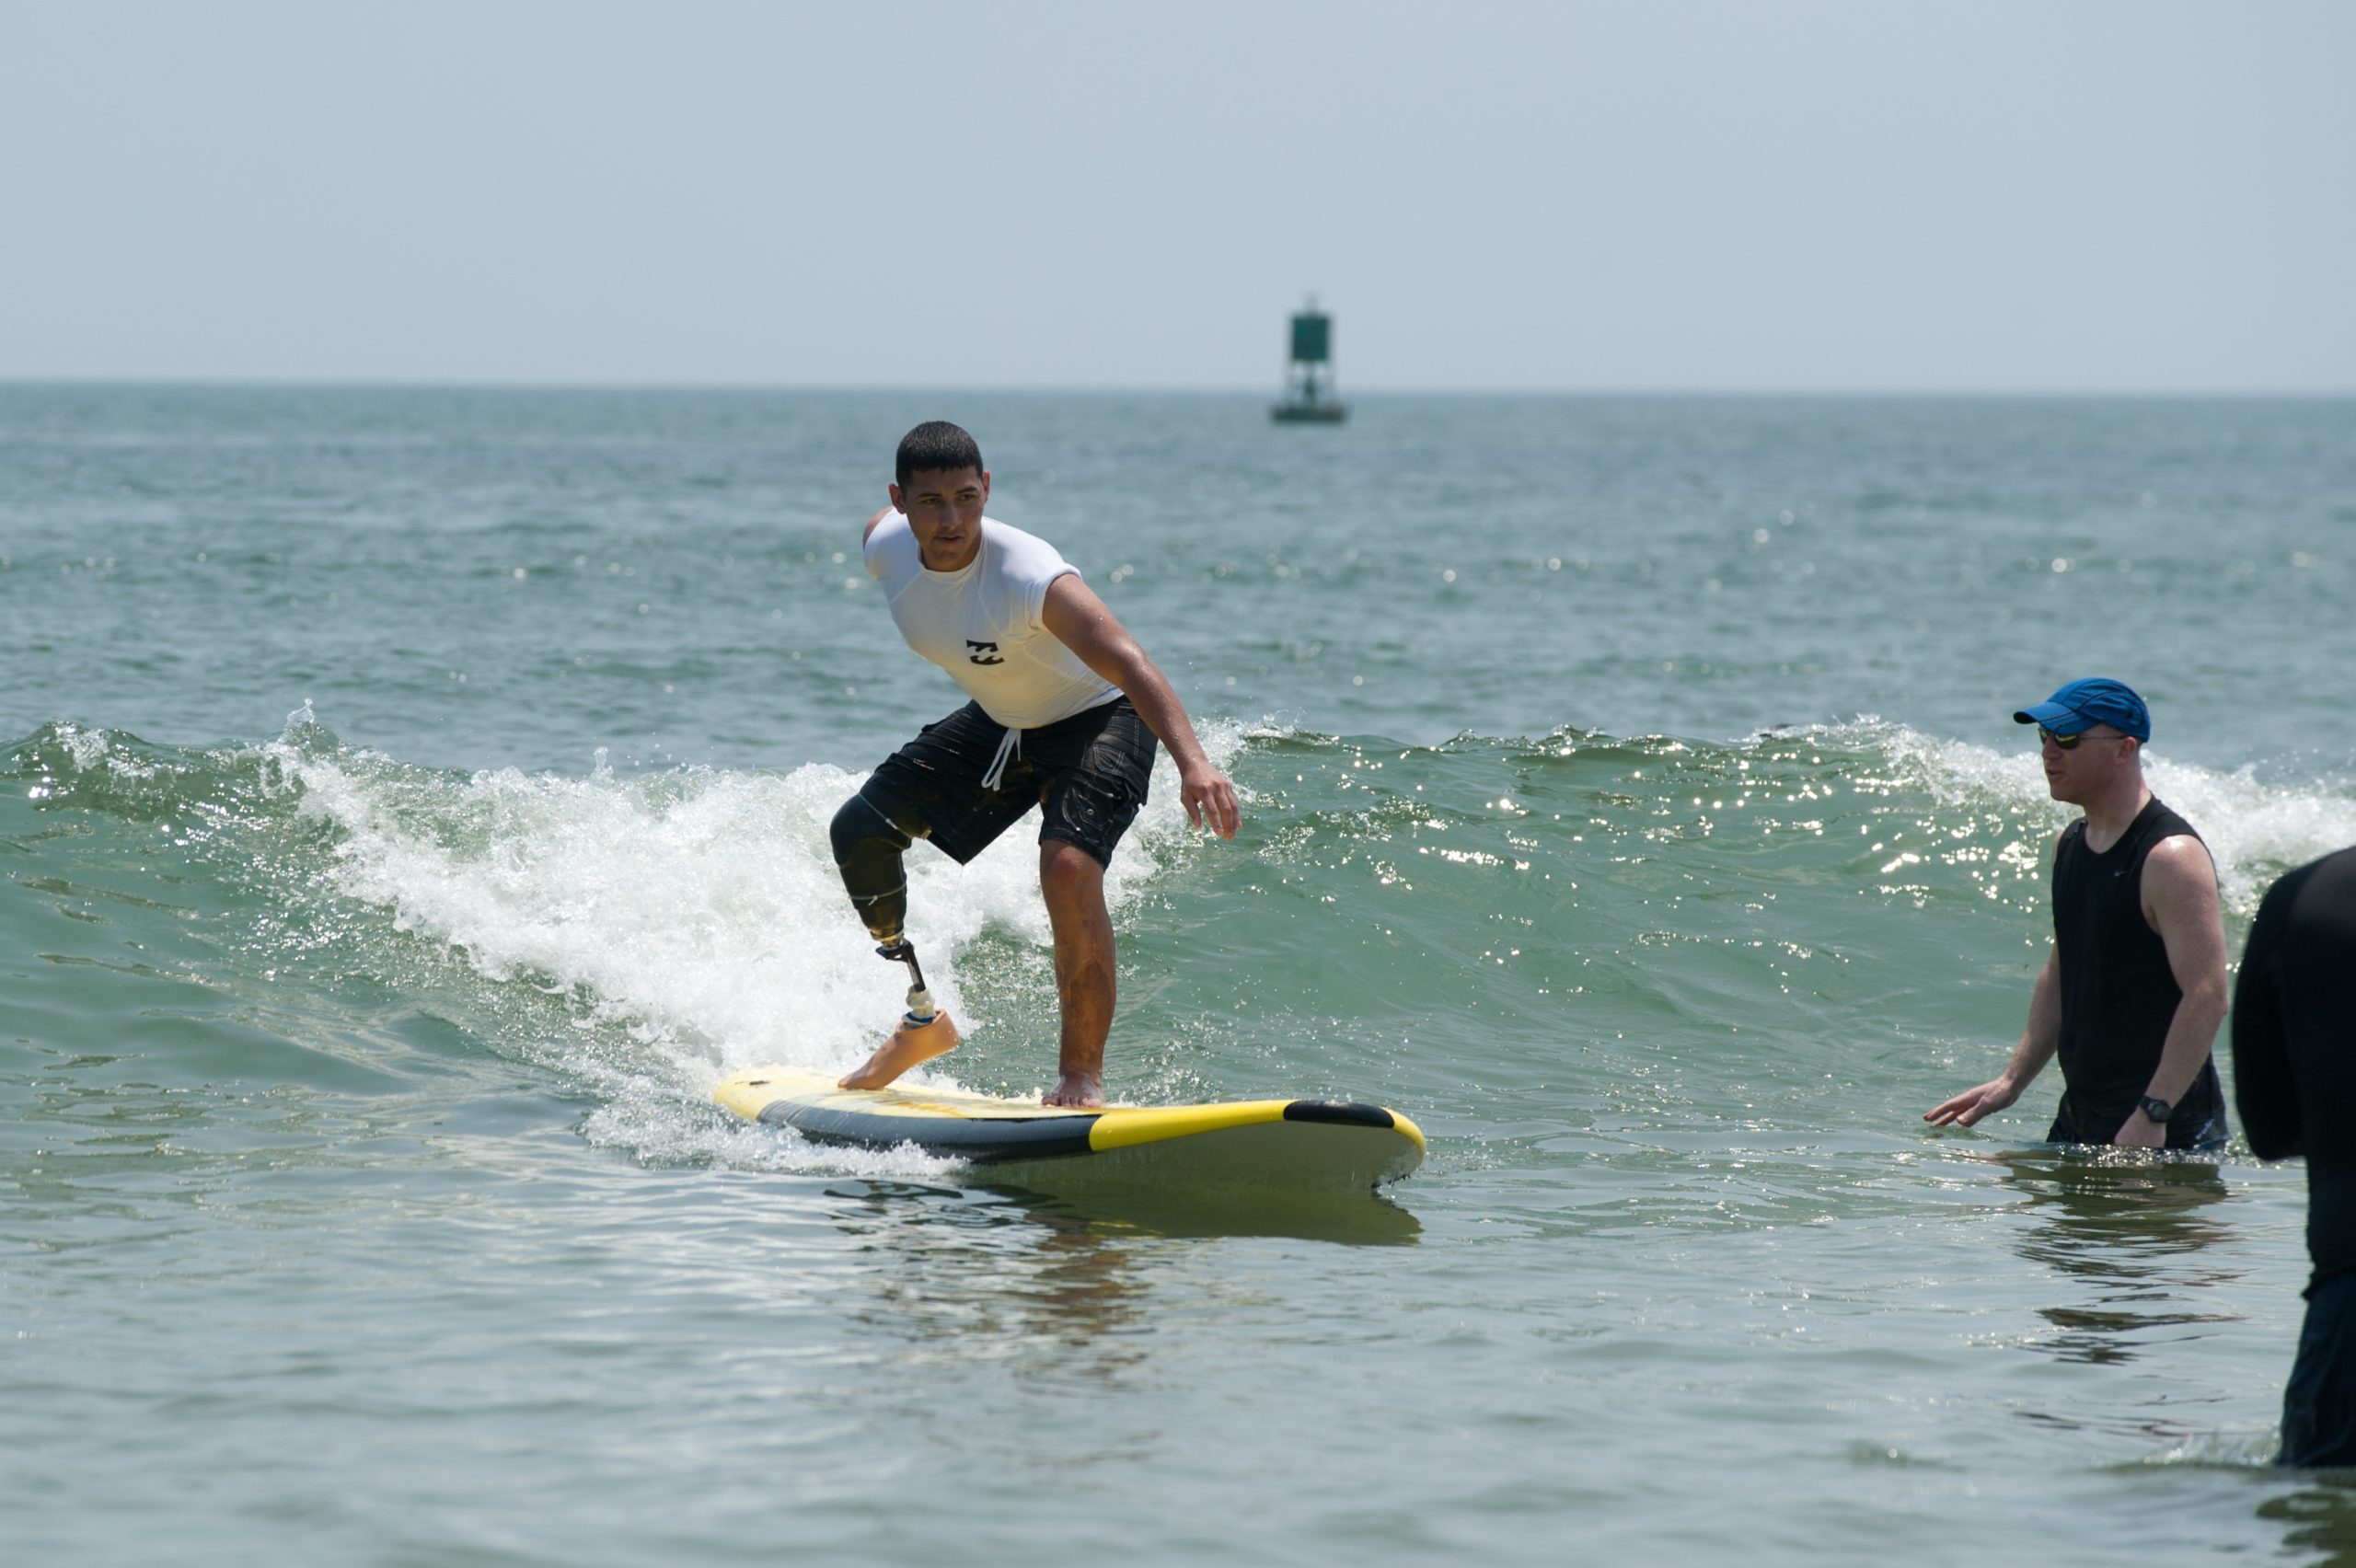 Male athlete with right leg prosthetic standing up on surfboard